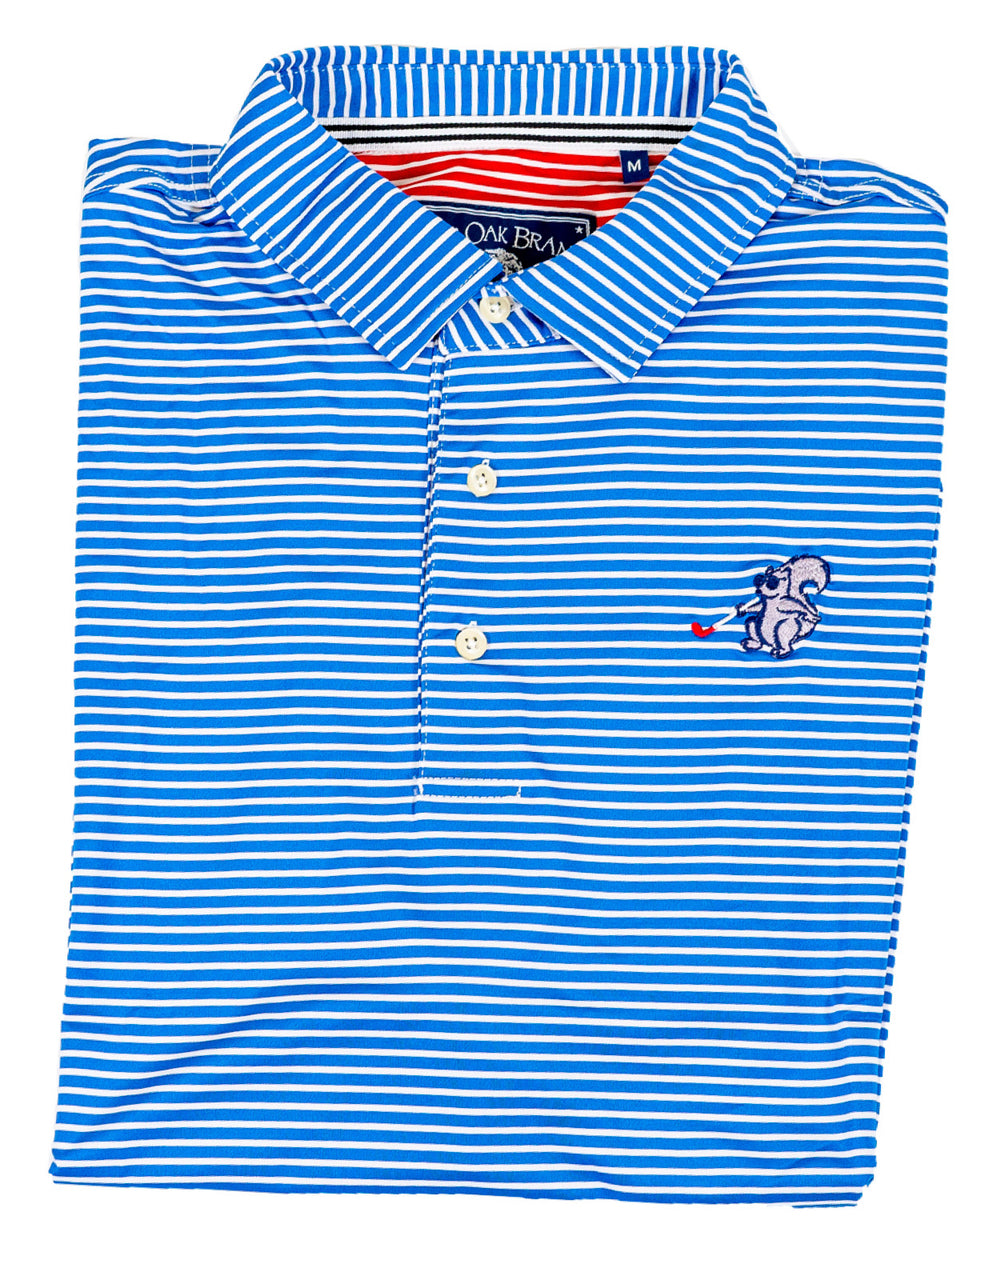 BLIND SQUIRREL STRIPED PERFORMANCE POLO, ROYAL